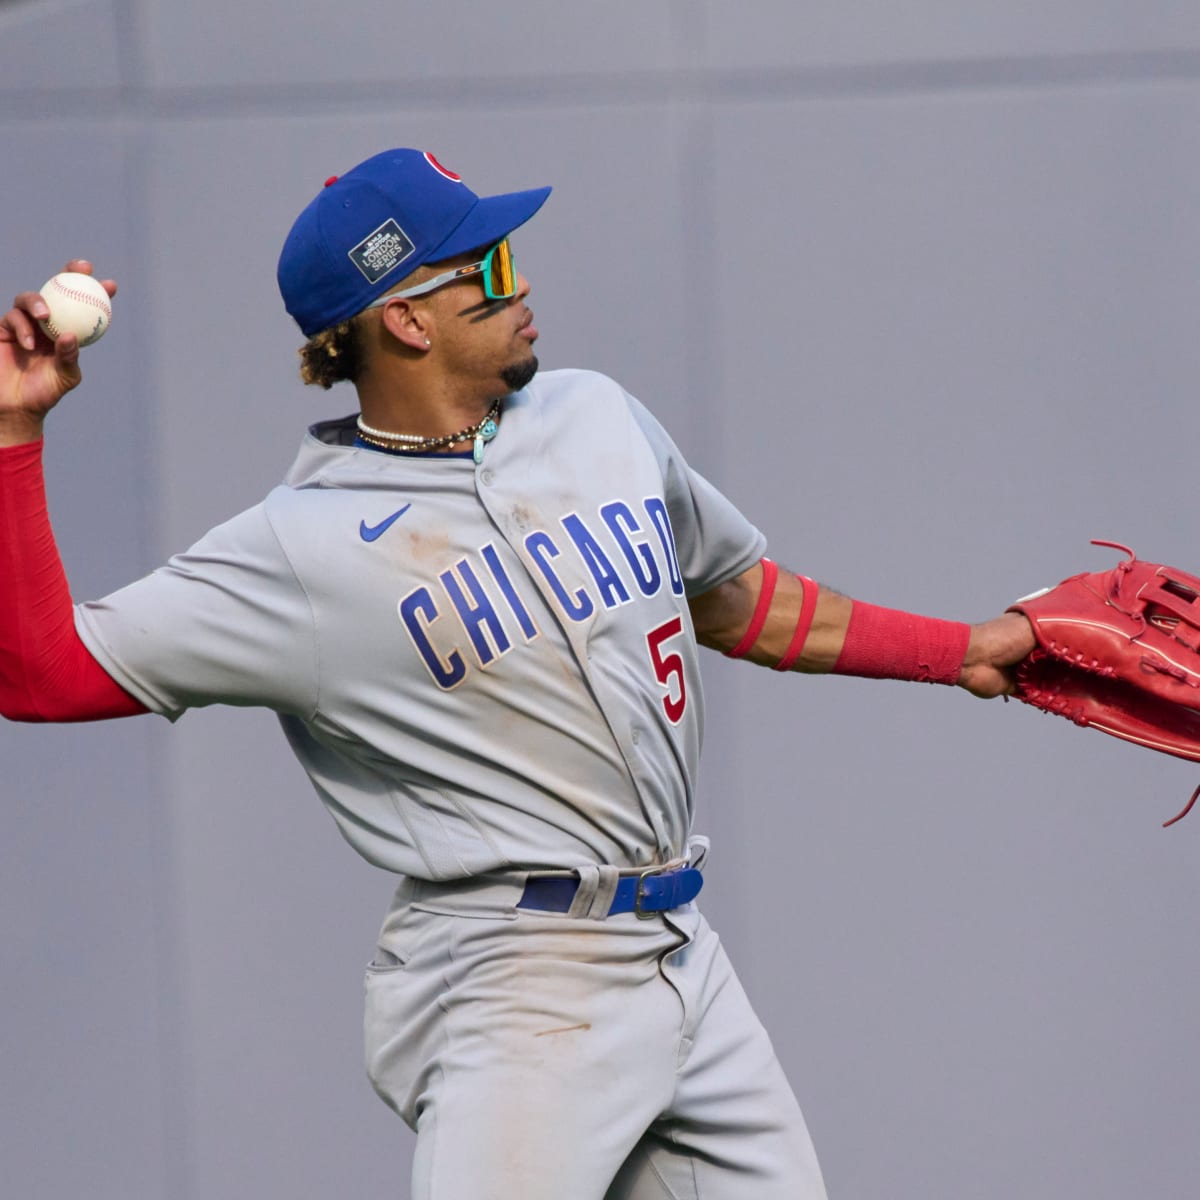 Why Does Chicago Have Two Baseball Teams? - 2 Reasons